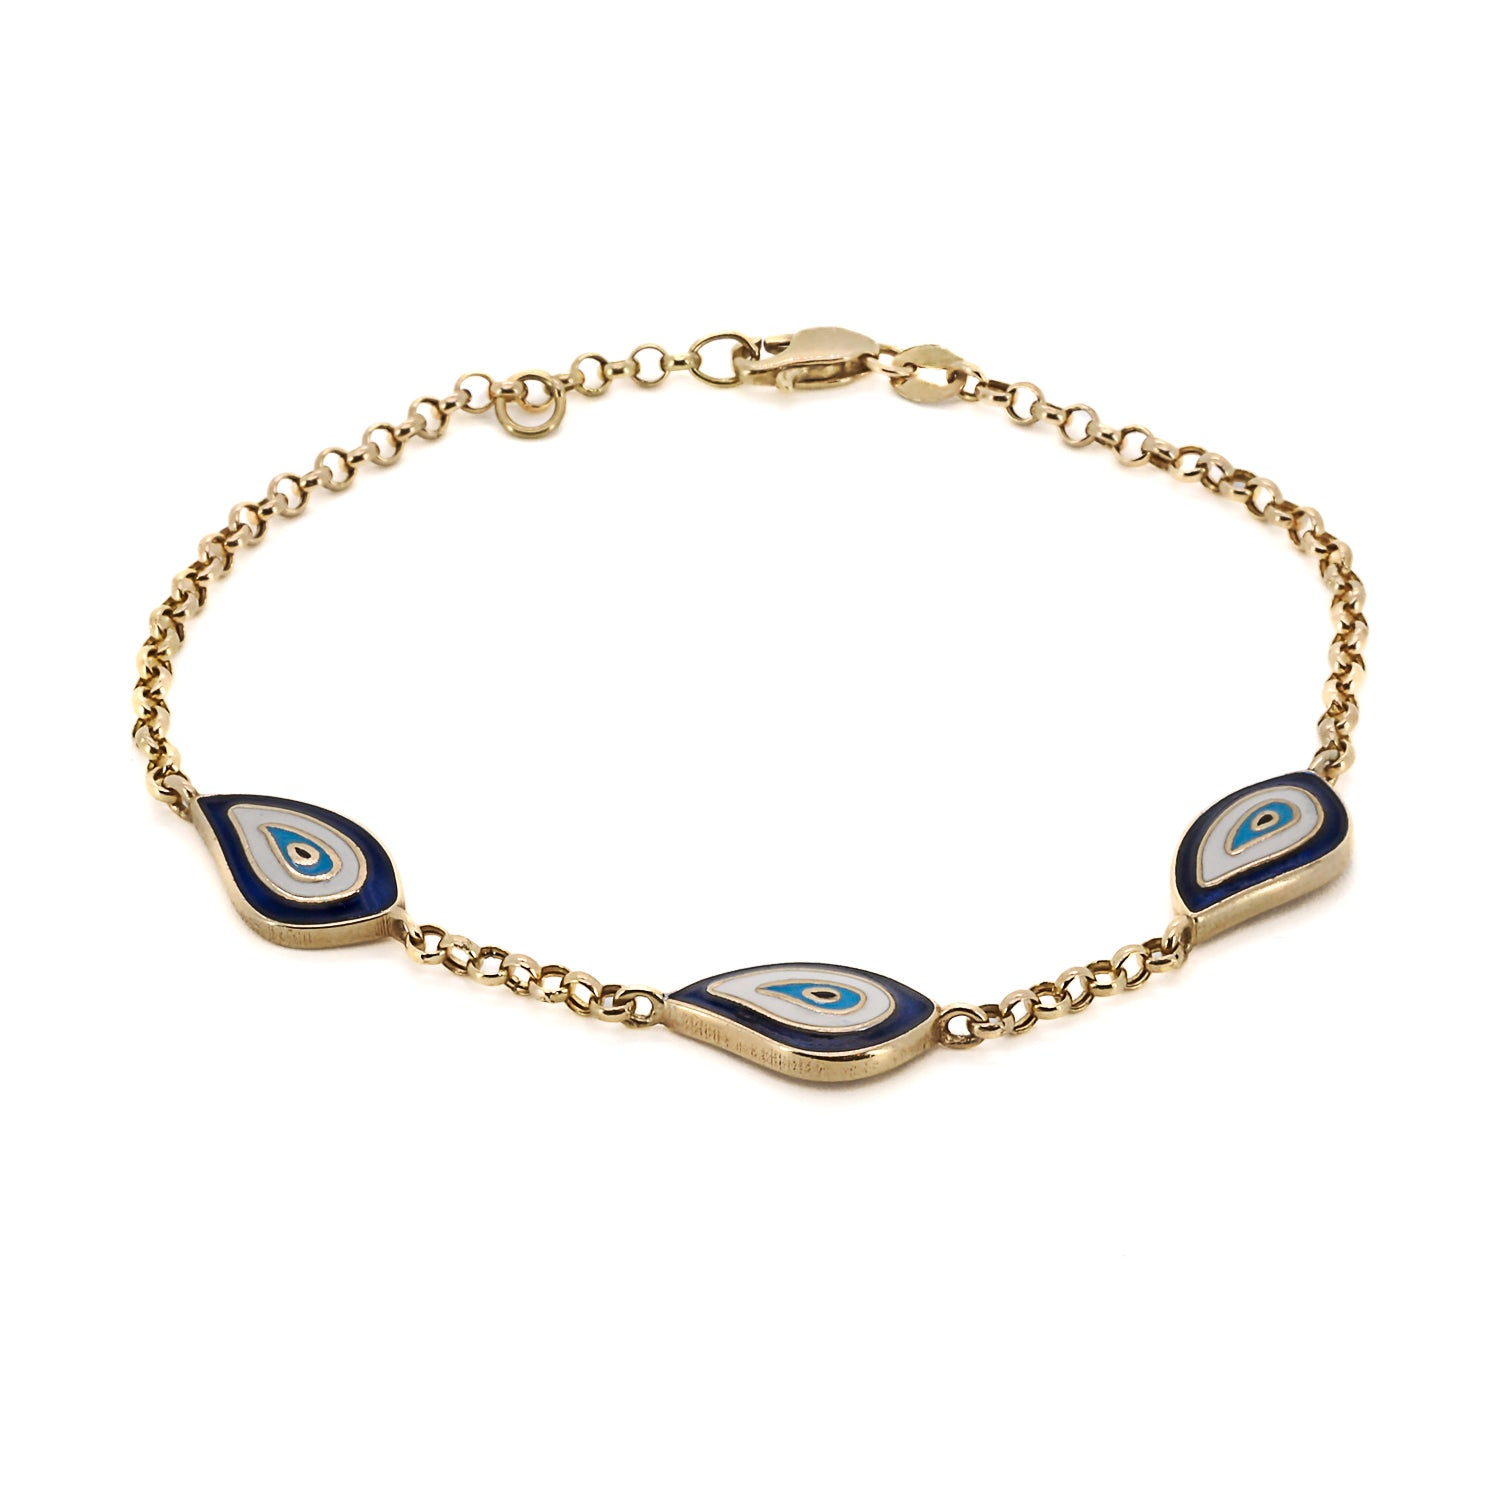 Gold Teardrop Lucky Evil Eye Bracelet - A close-up view of the exquisite Gold Teardrop Lucky Evil Eye Bracelet, showcasing the teardrop-shaped charms crafted from 14k gold and adorned with blue enamel.